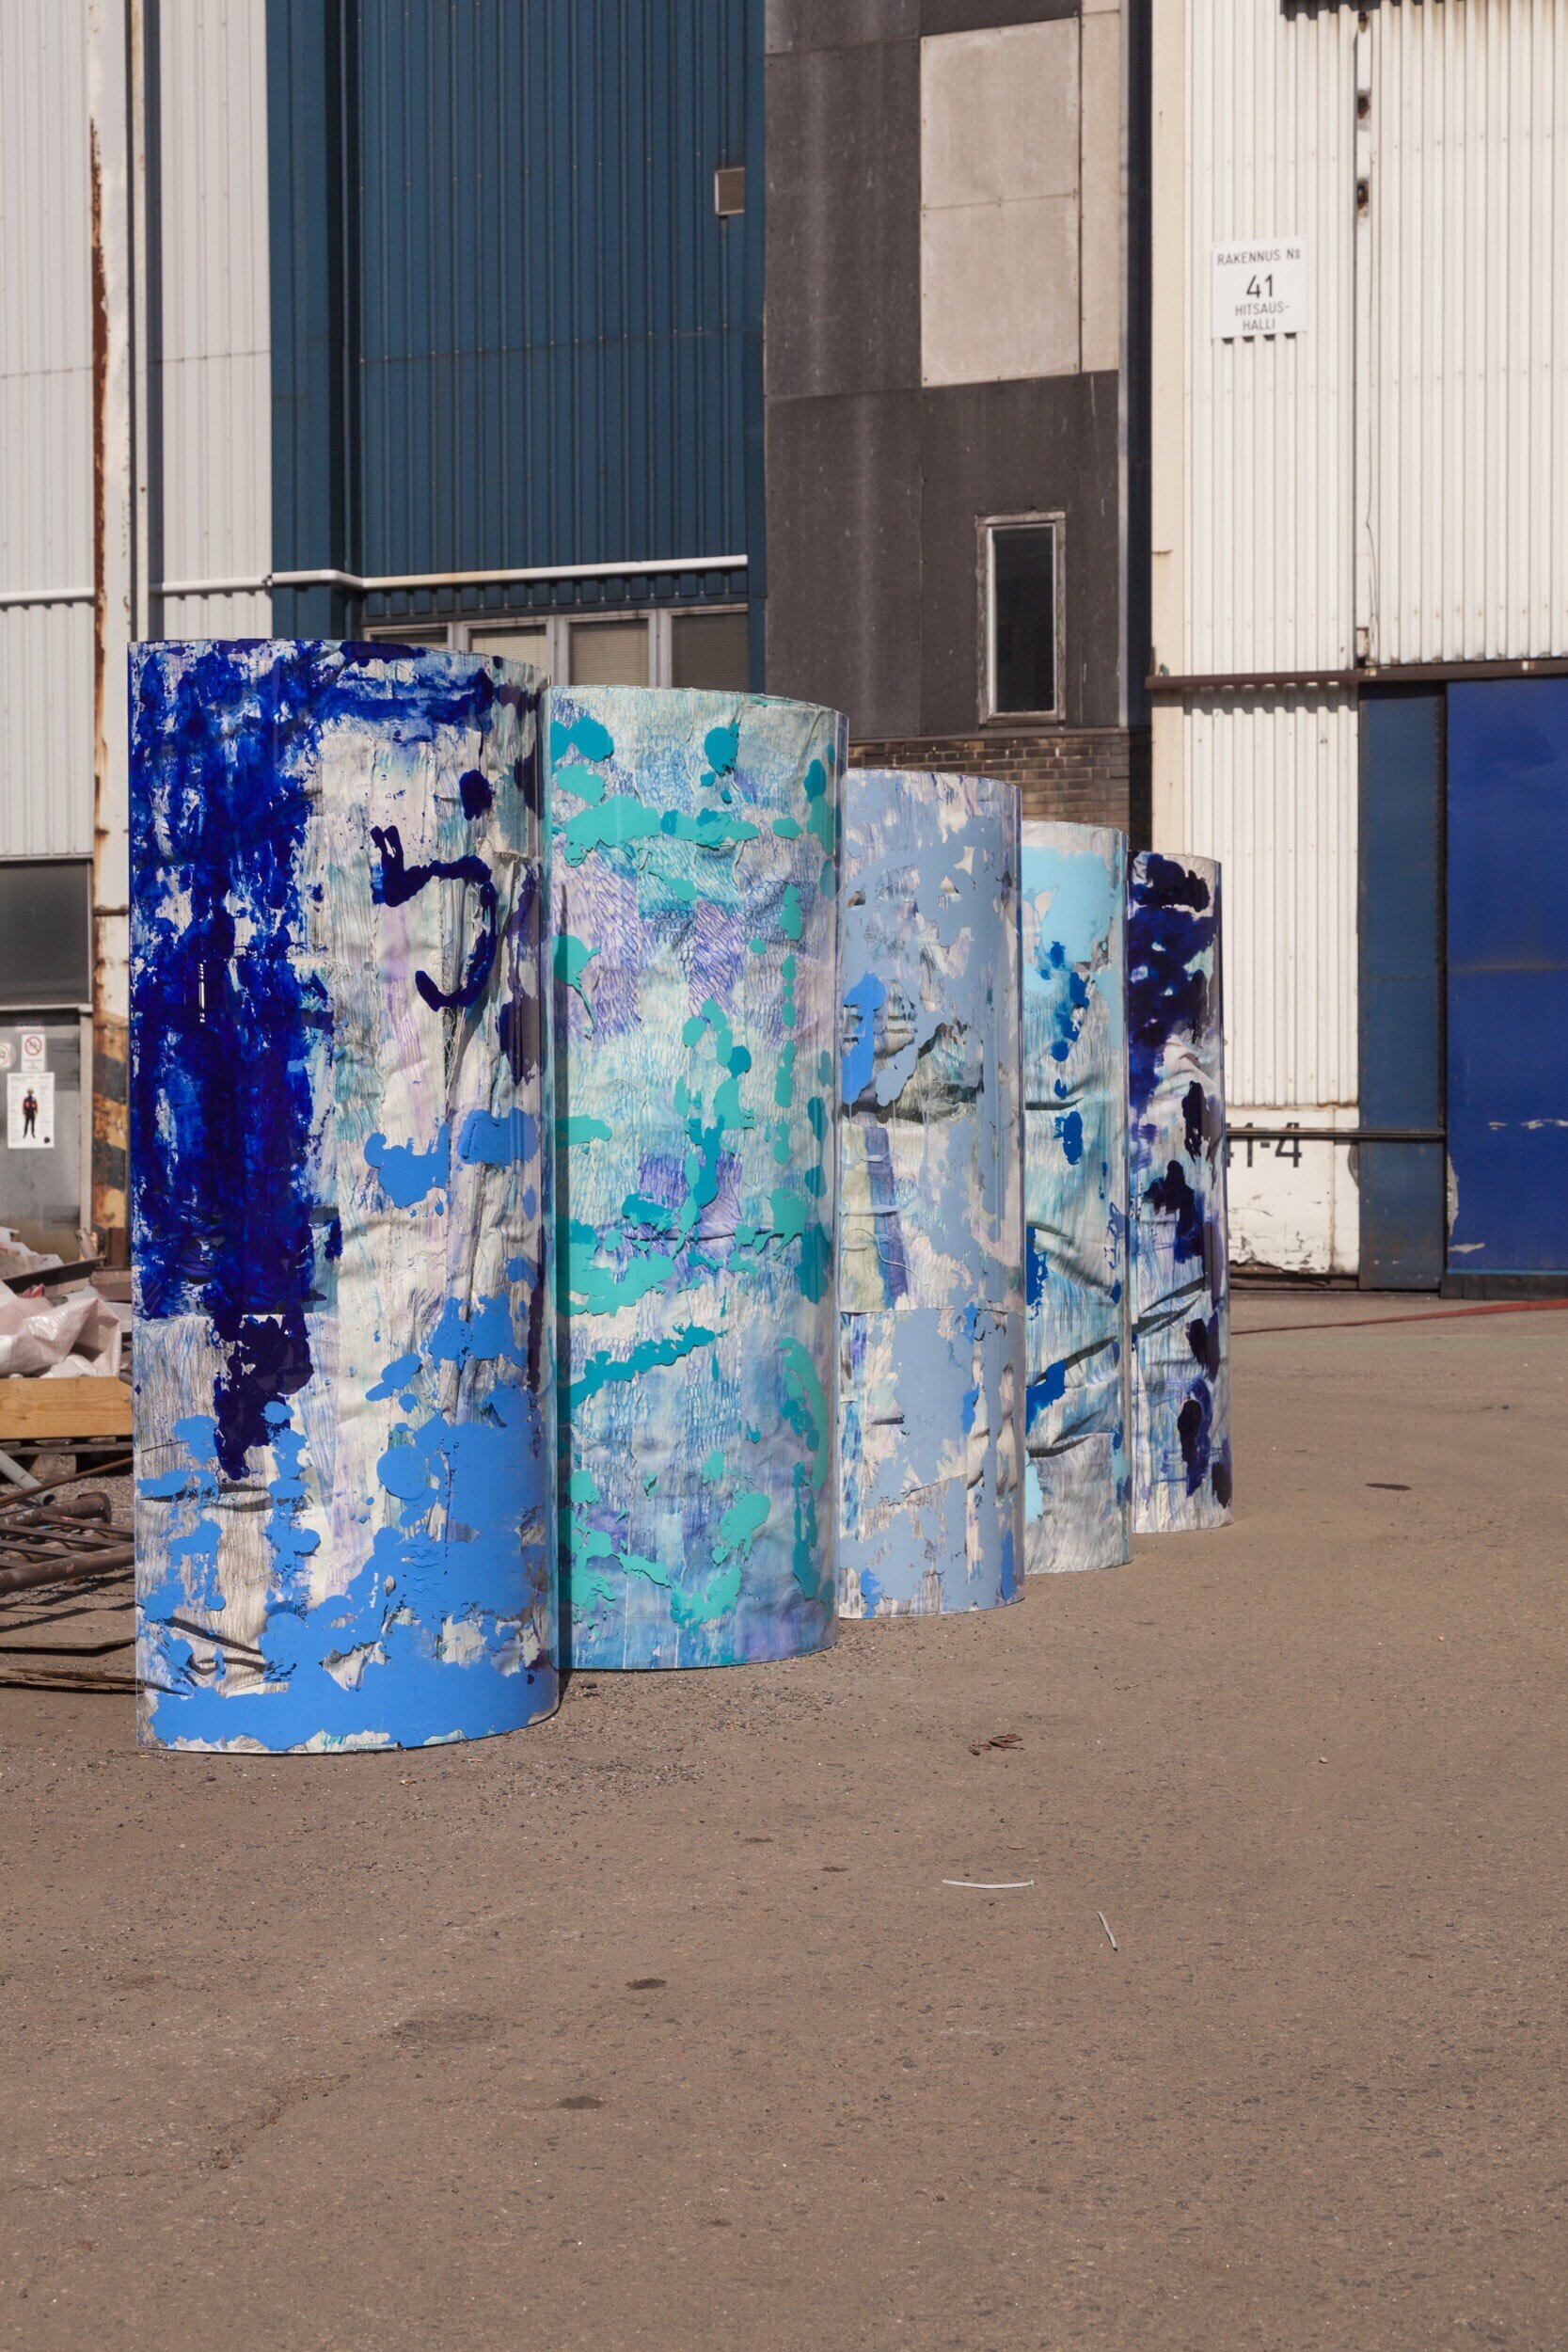 Blue Waves, 2019, 5 x 190 x 100 cm, mixed media on recycled plastic